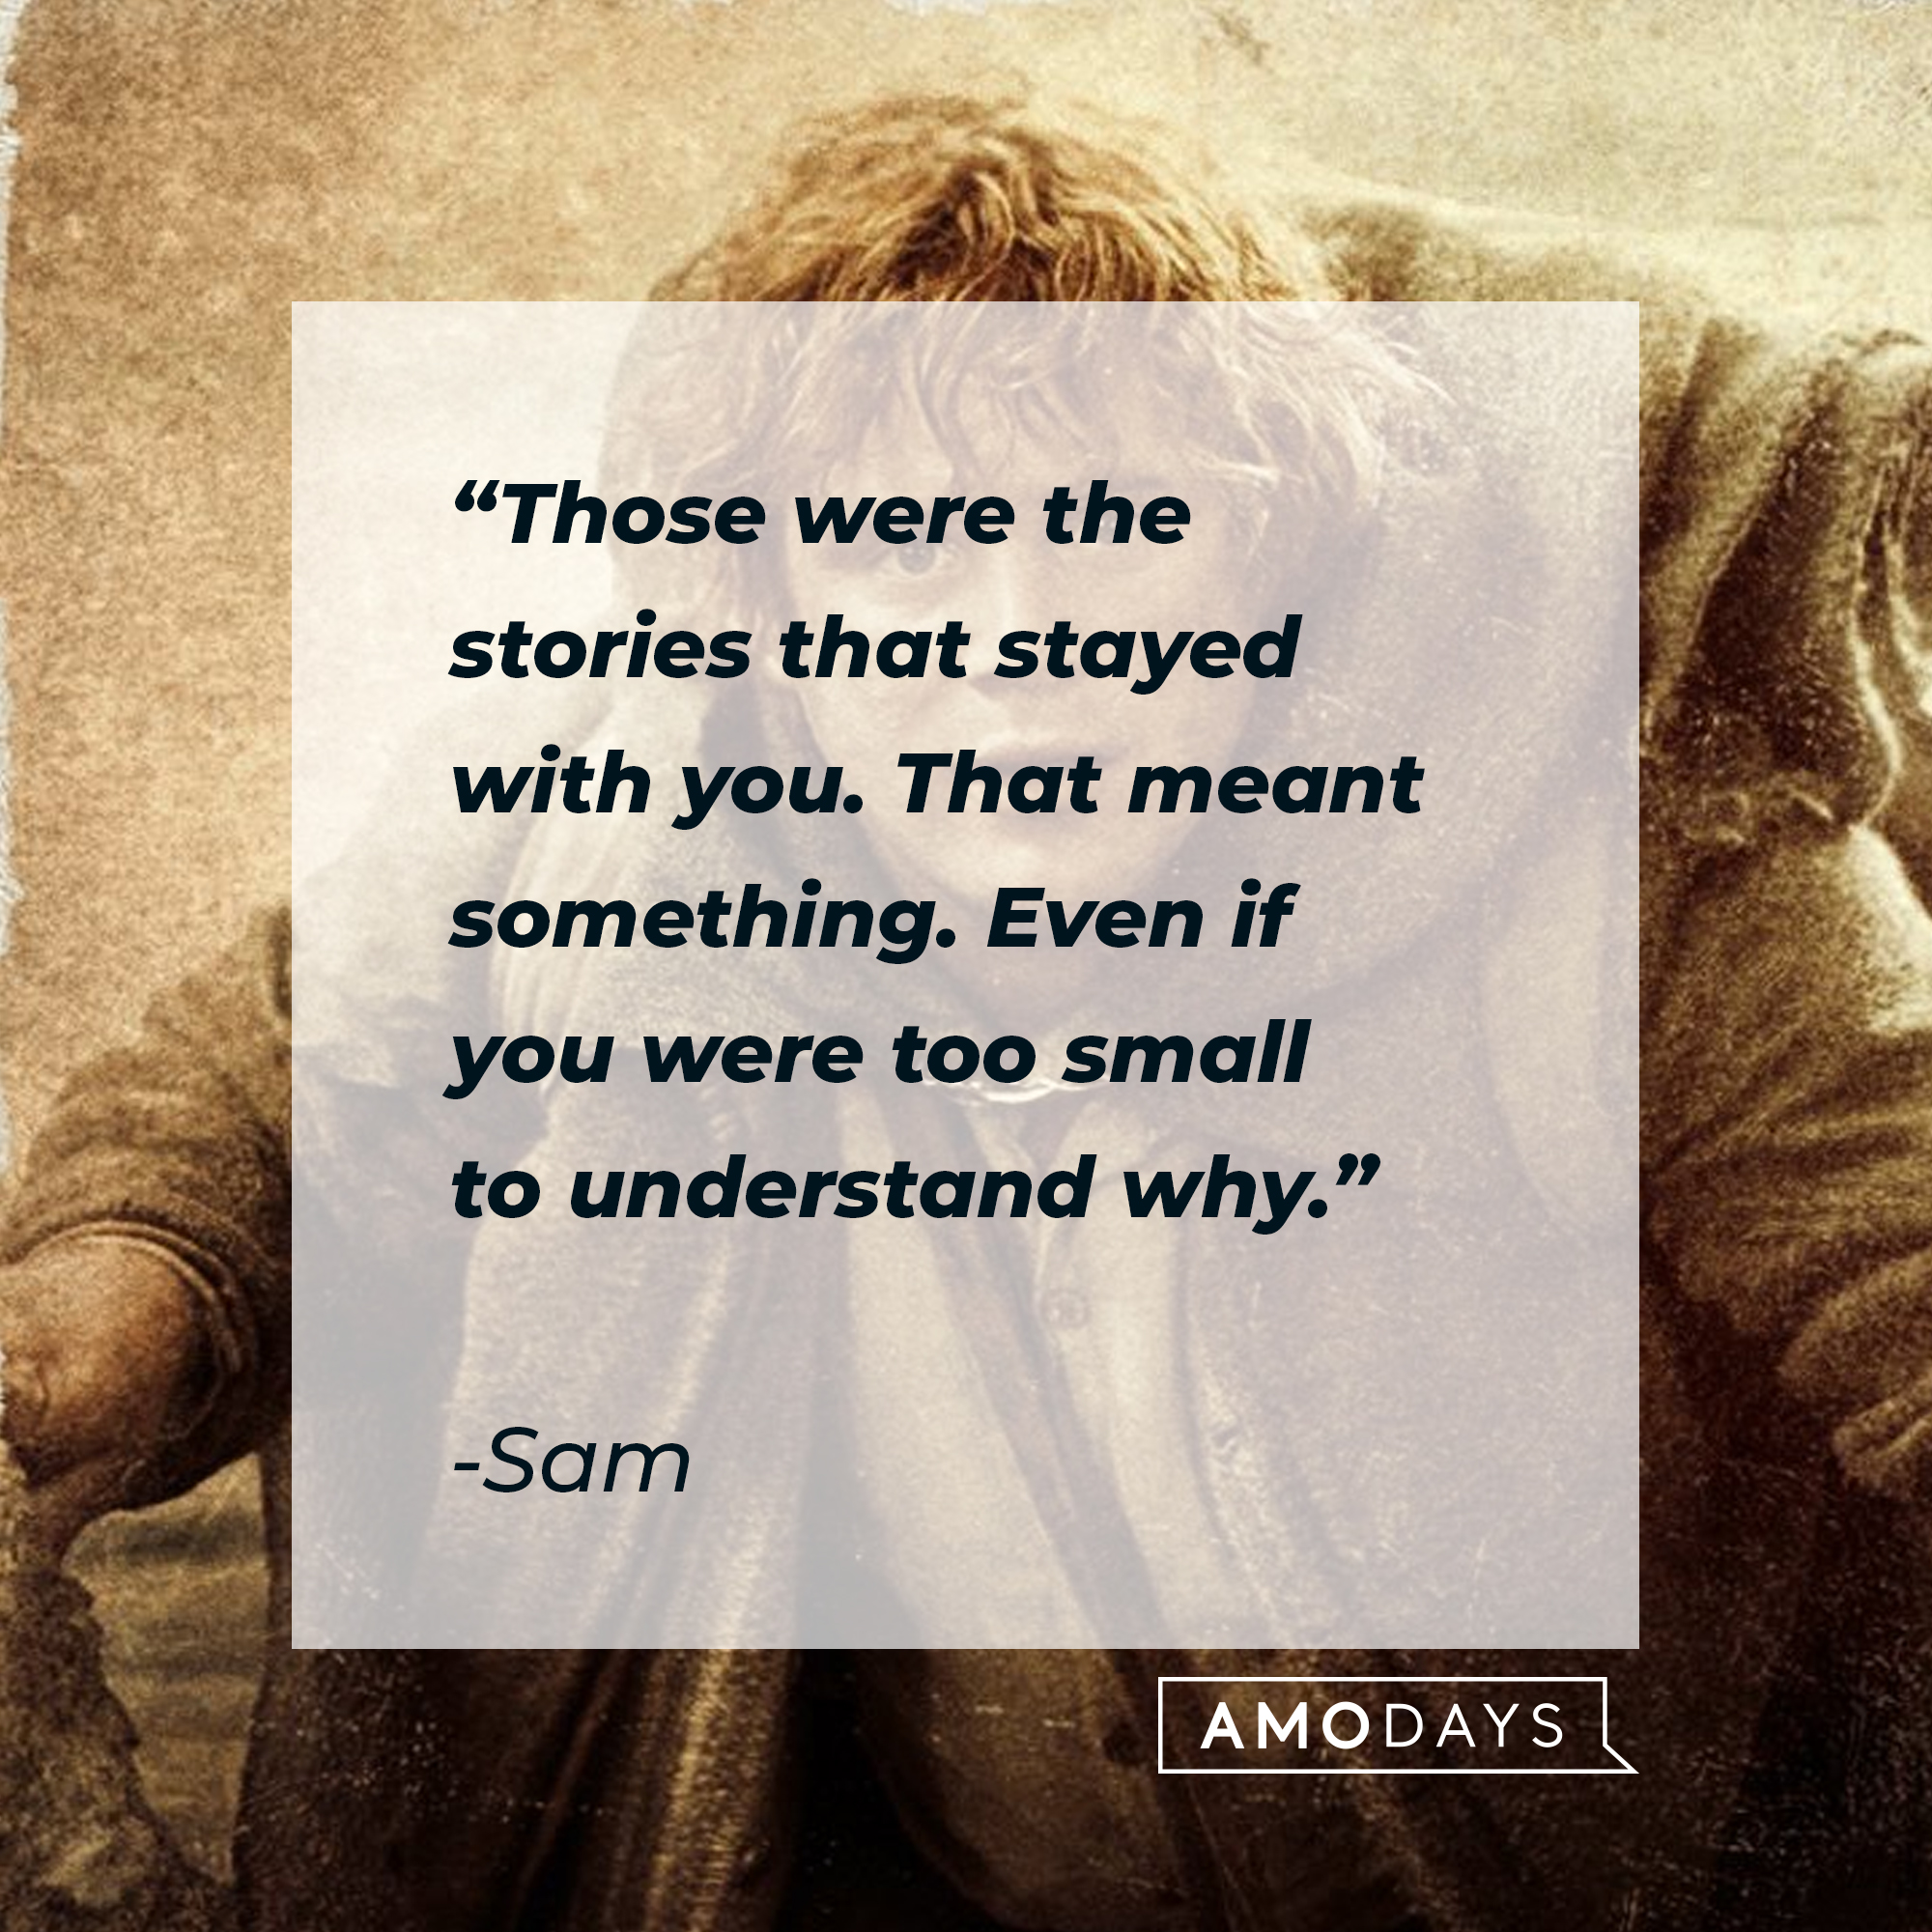 Sam's quote: "Those were the stories that stayed with you. That meant something. Even if you were too small to understand why." | Source: facebook.com/lordoftheringstrilogy